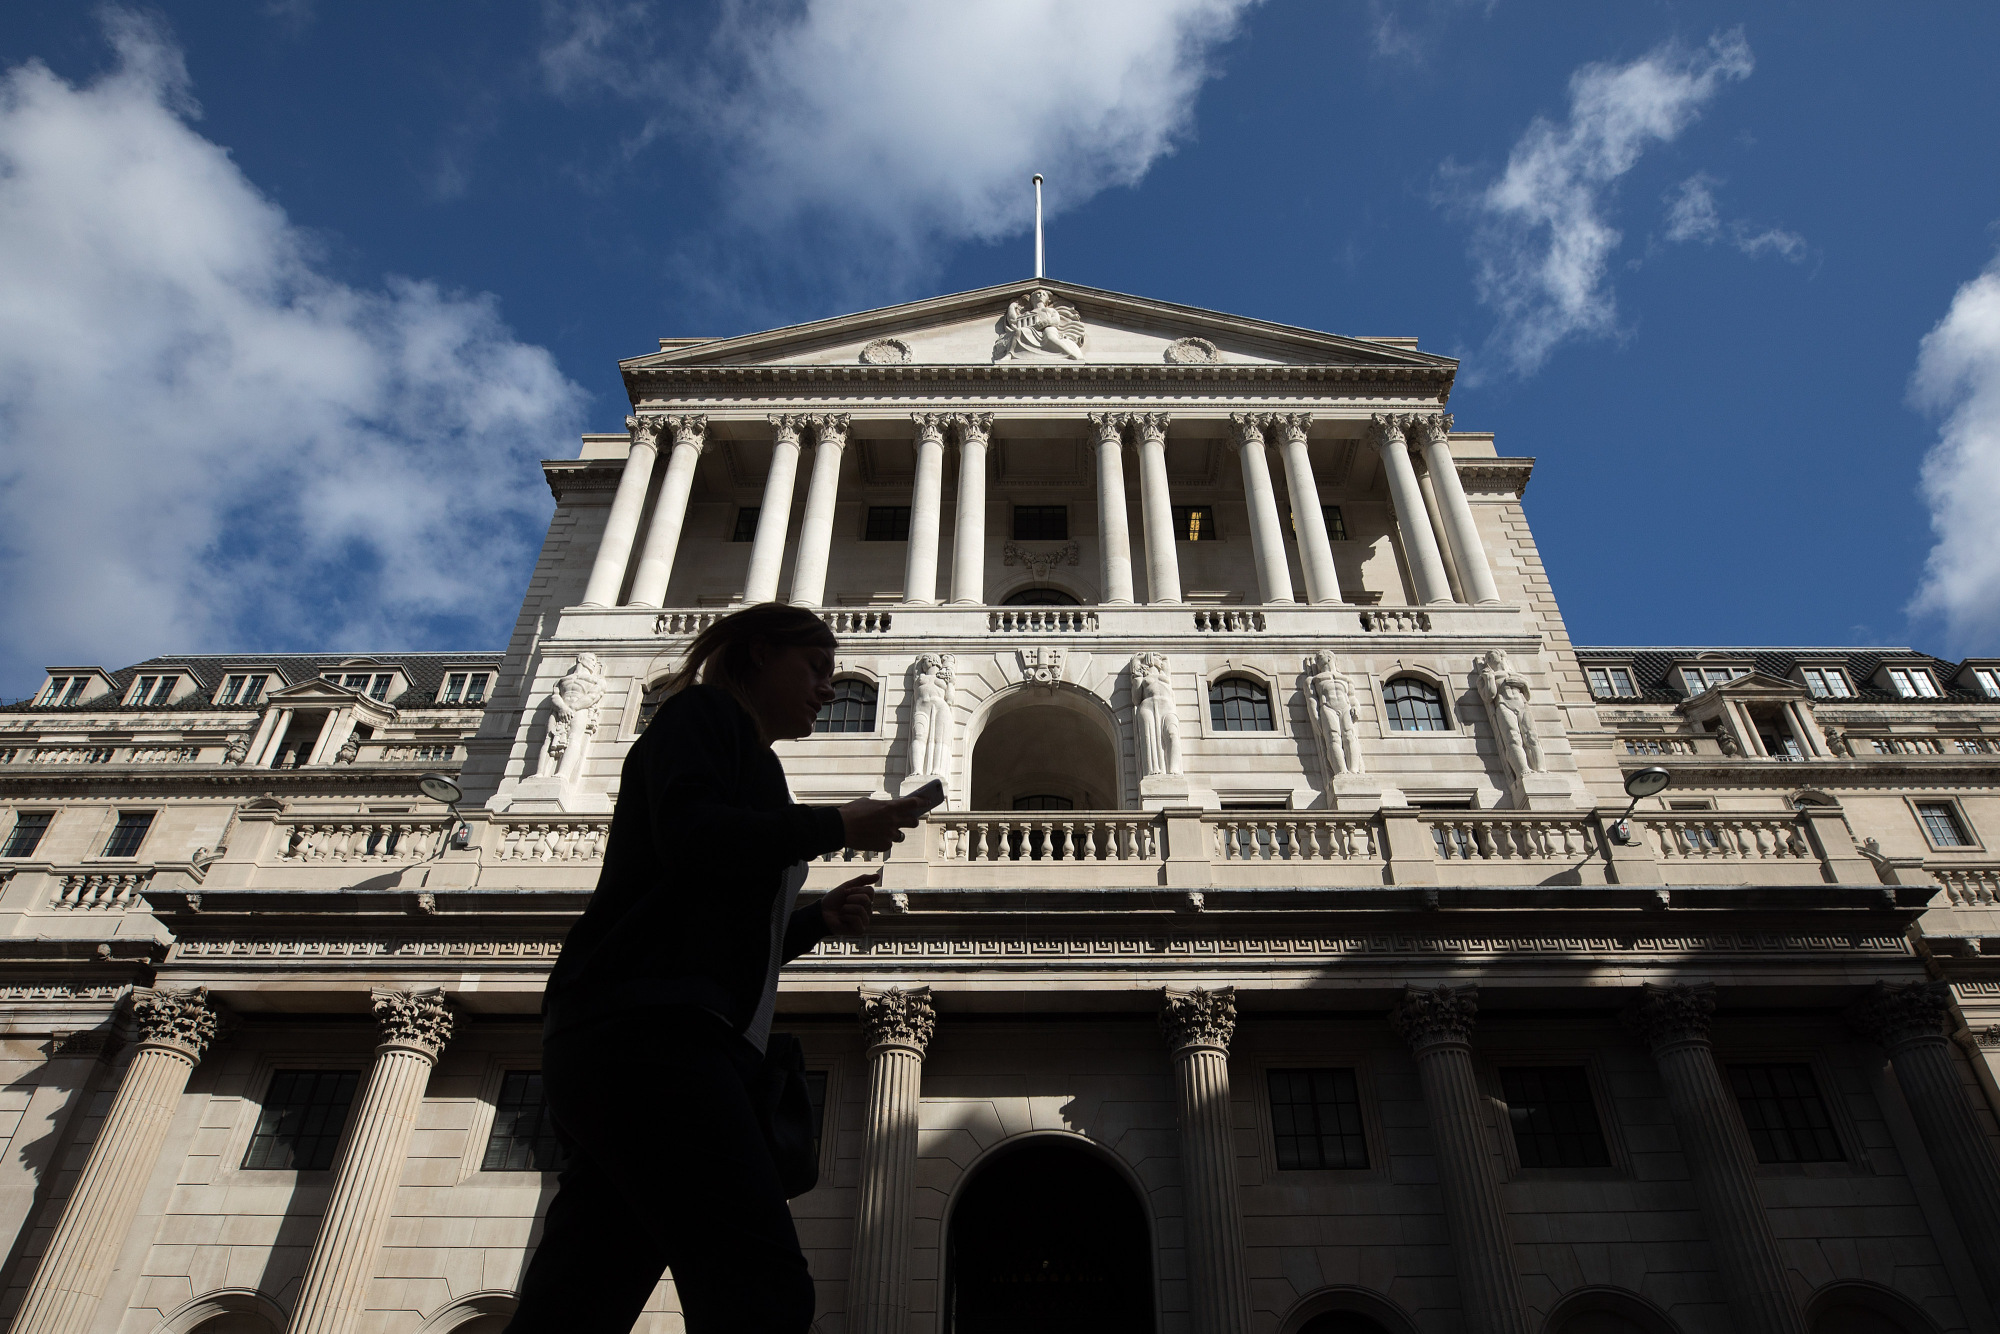 A pedestrian walks past the Bank of England in the City of London, U.K., on Monday July 31, 2017. Consumer credit growth slowed in June after the Bank of England officials took action to limit some areas of risk of borrowing.